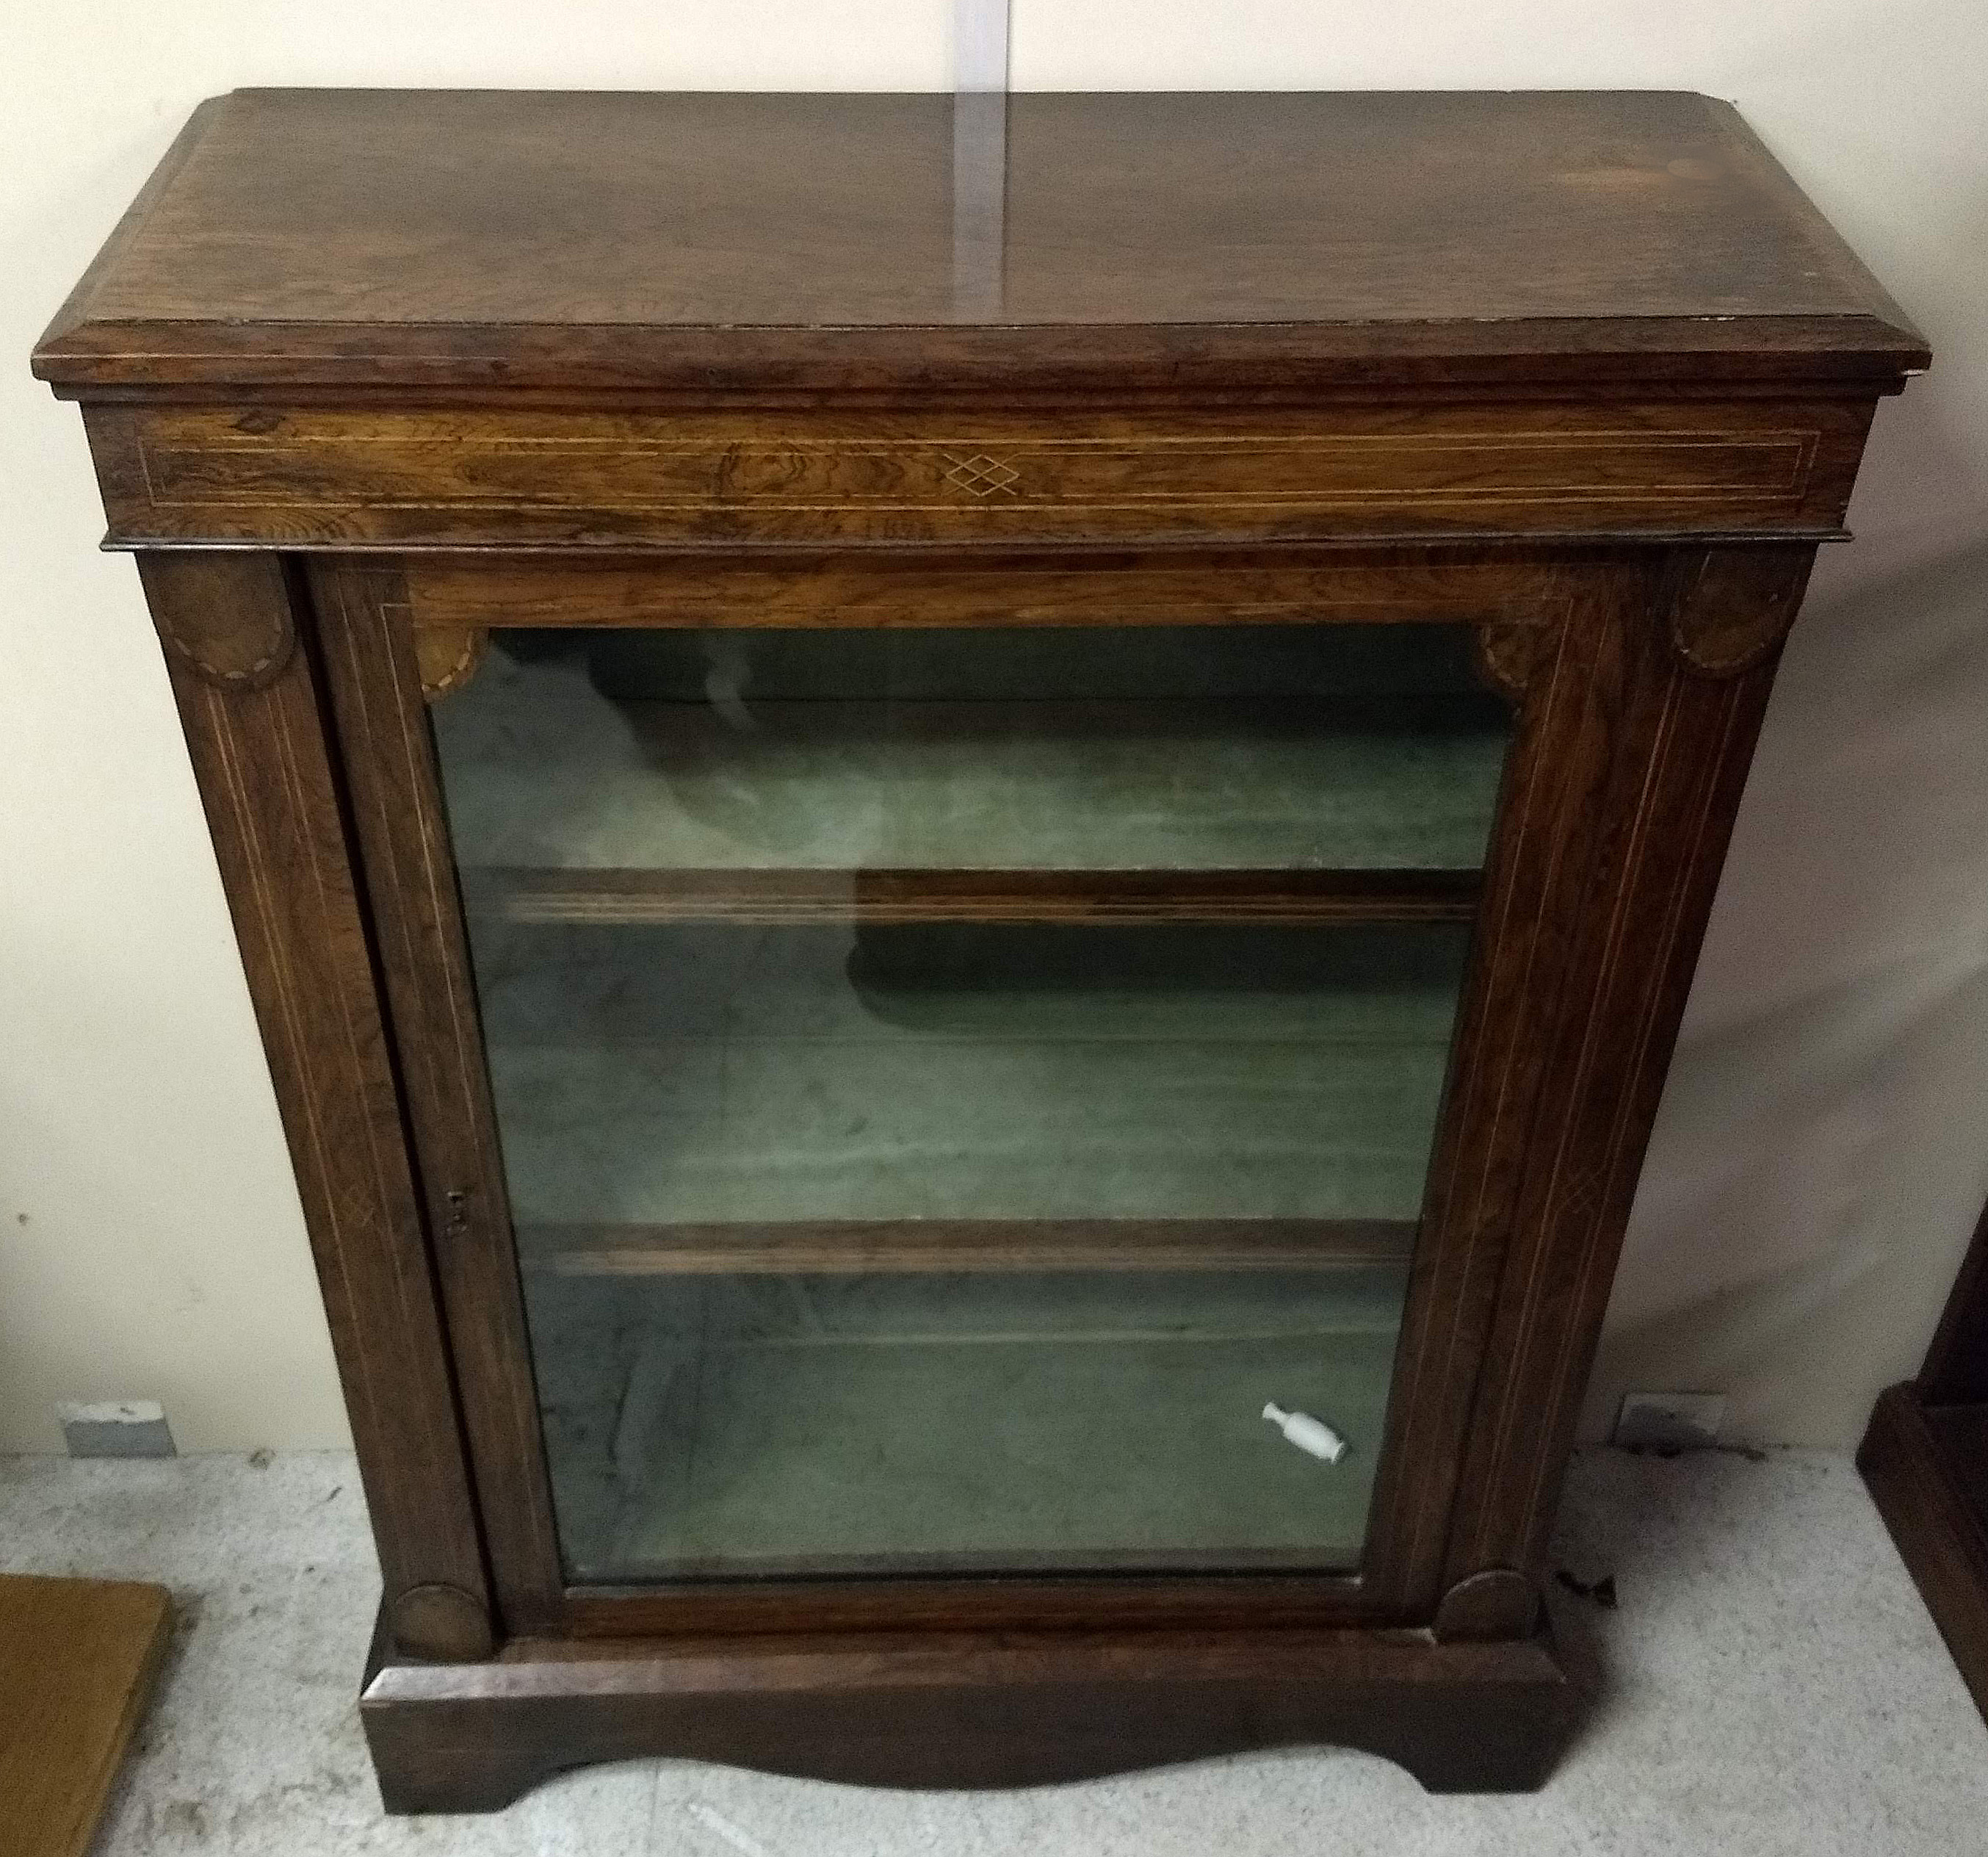 A 19th Century rosewood and inlaid pier cabinet, single glazed door, two fixed shelves, green velvet